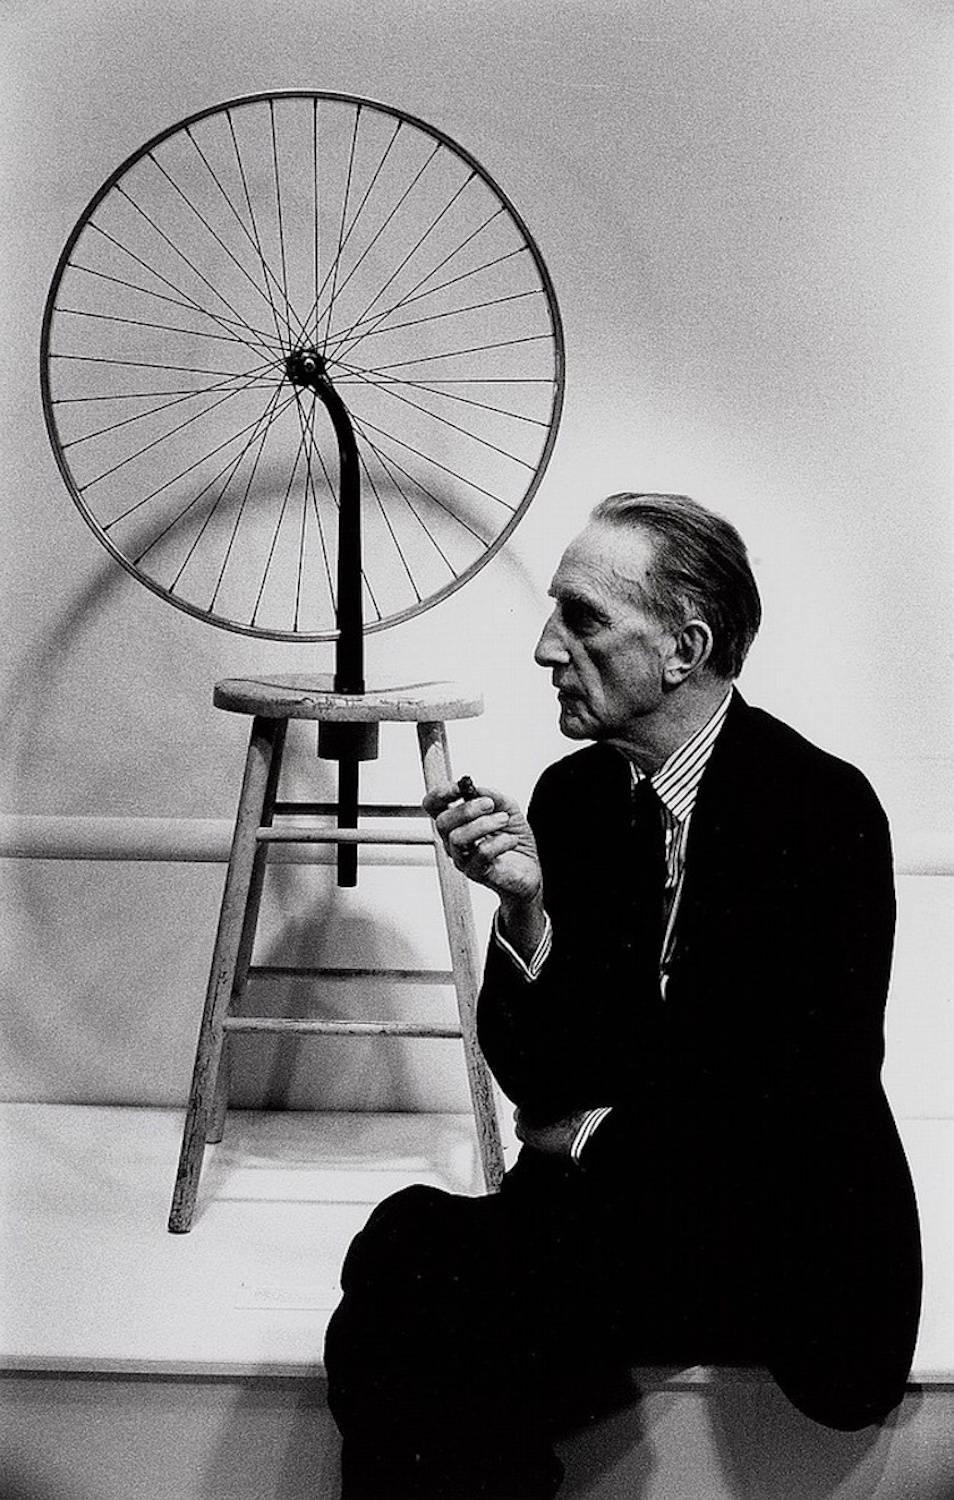 Marcel Duchamp with his Bicycle Wheel, 1963